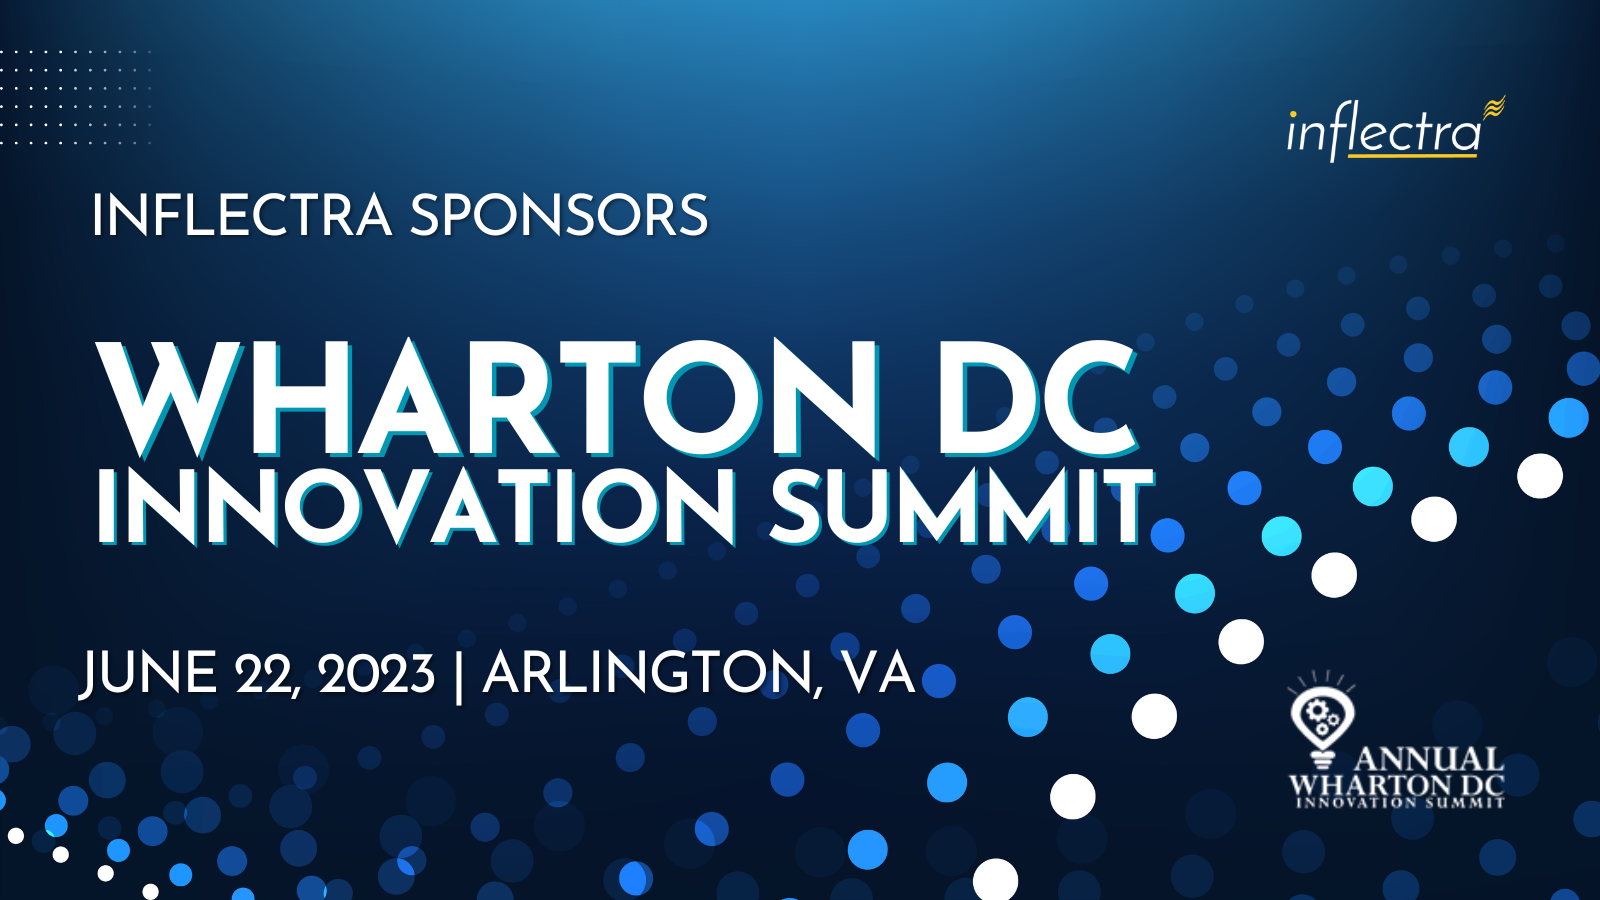 inflectra-sponsors-embassy-reception-for-the-wharton-dc-innovation-summit-in-june-image